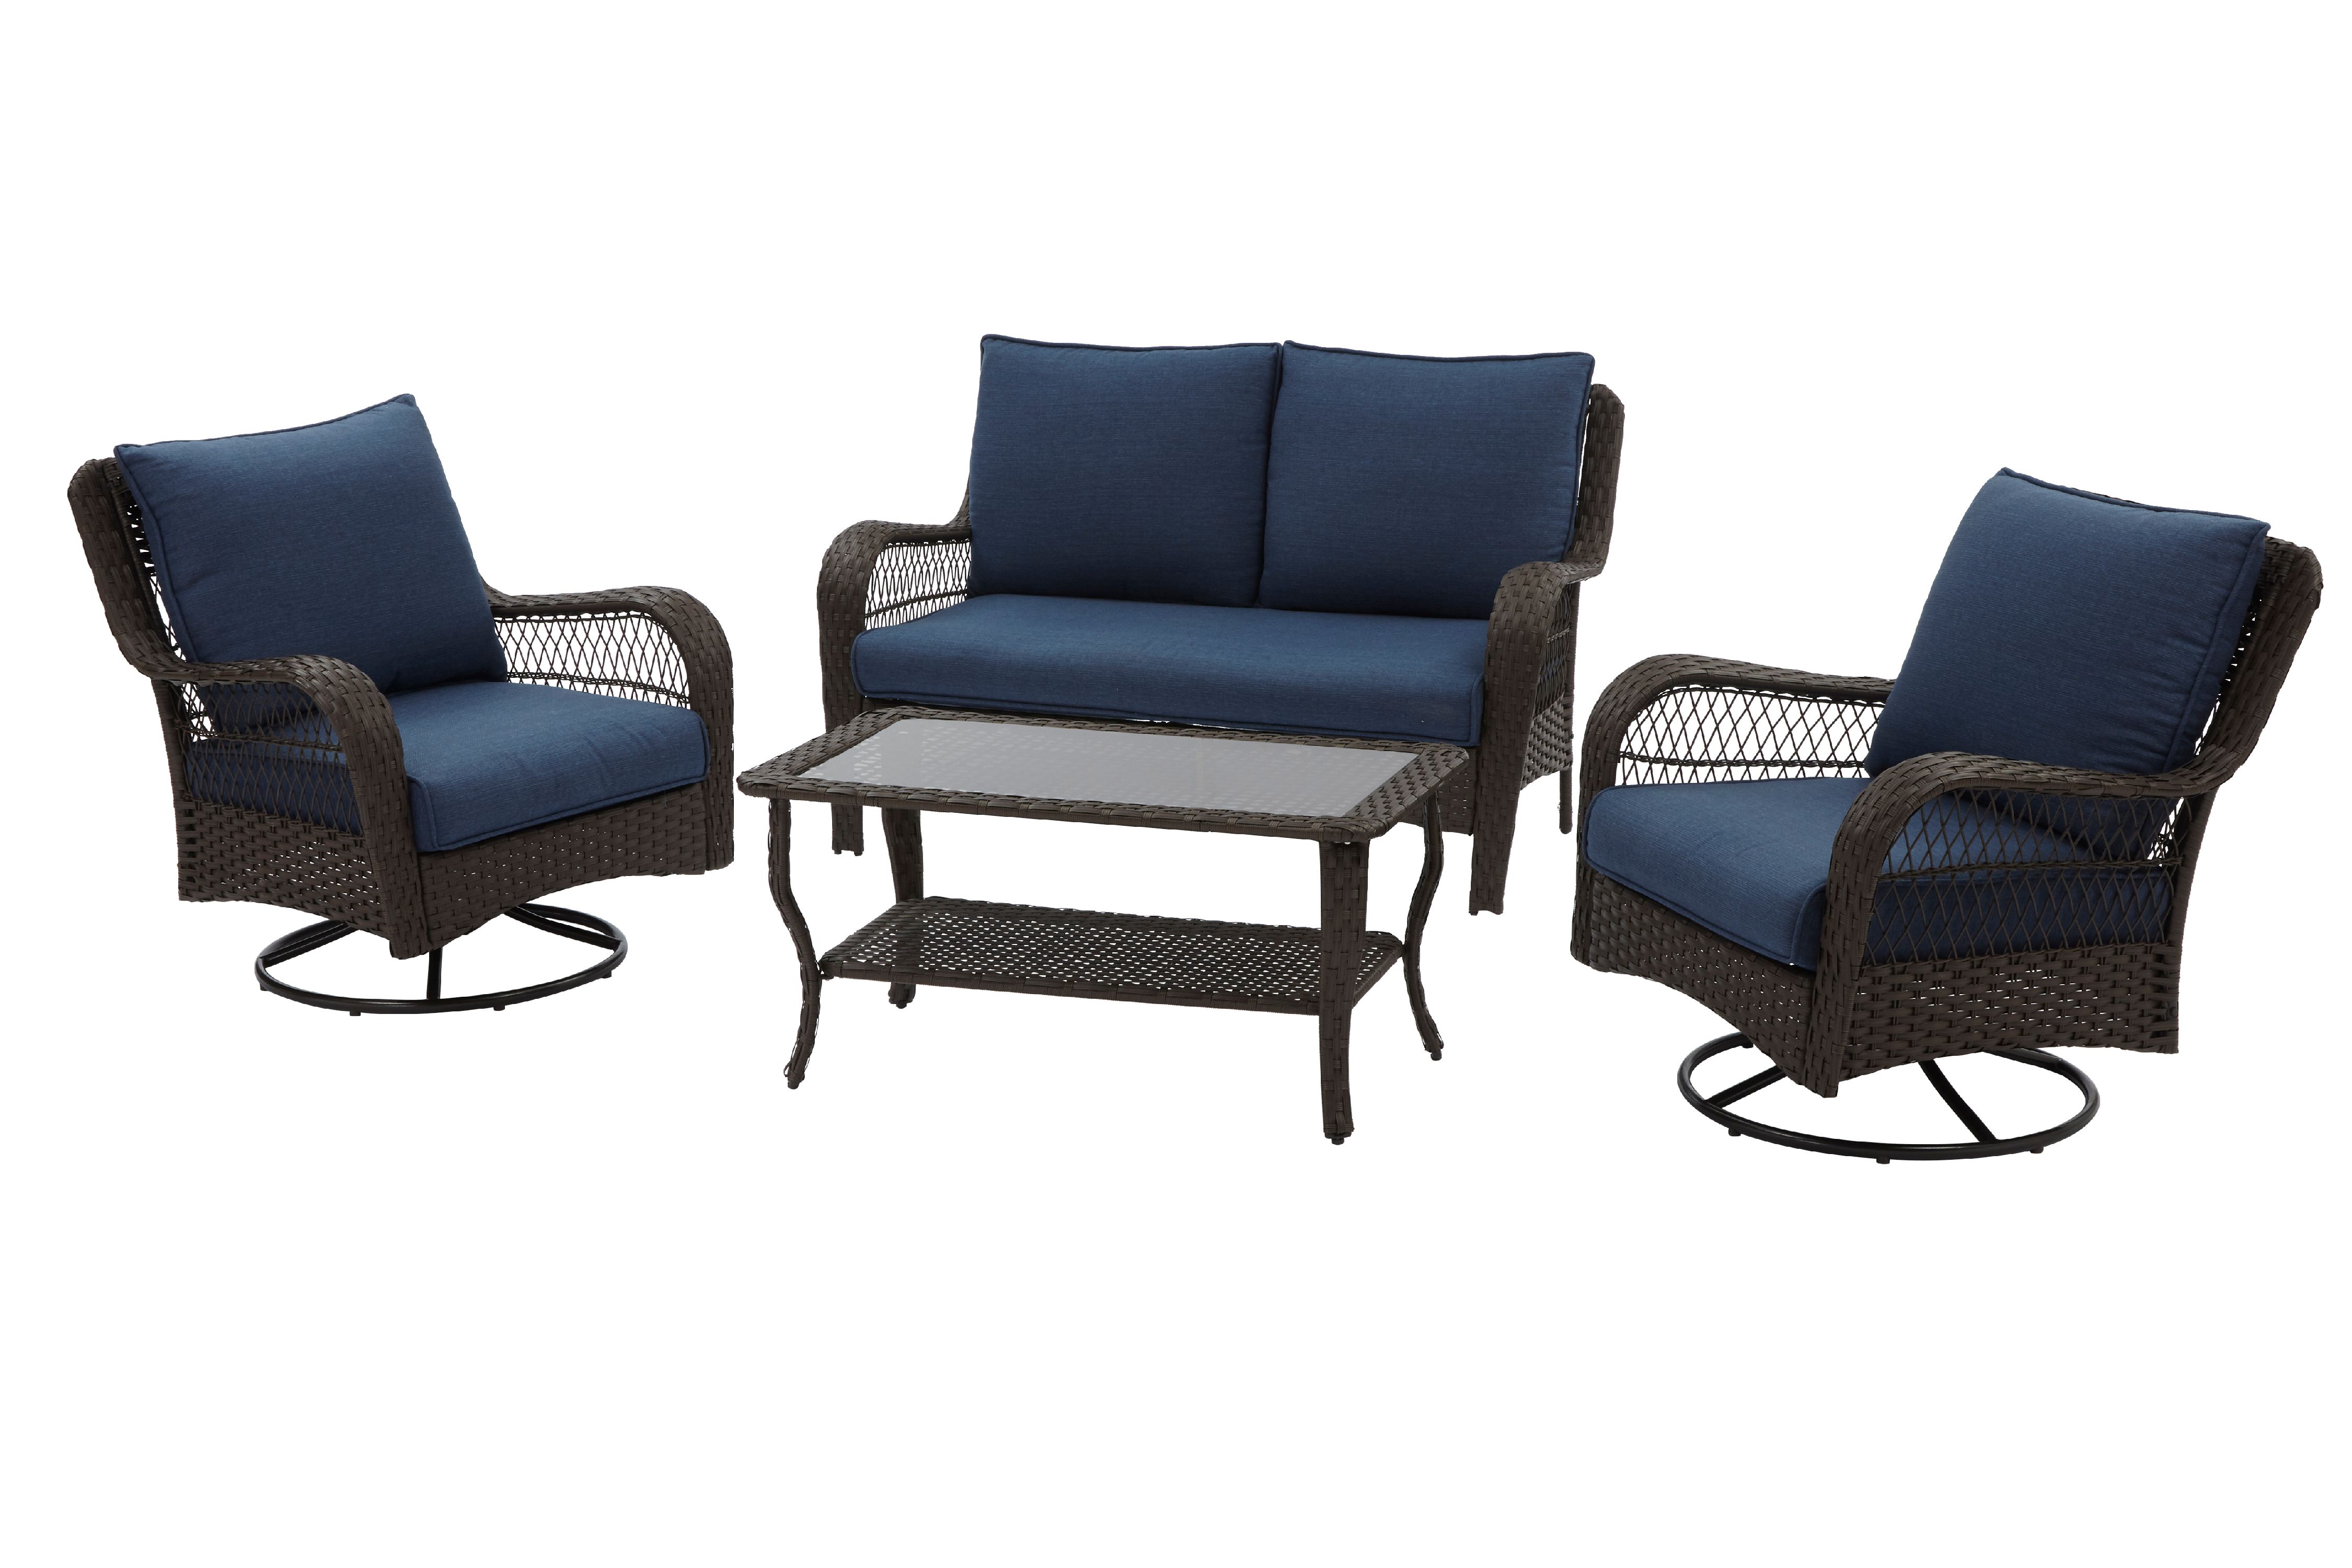 Better Homes & Gardens Colebrook 4-Piece Wicker Patio Furniture Conversation Set, with Swivel Chairs - image 1 of 15